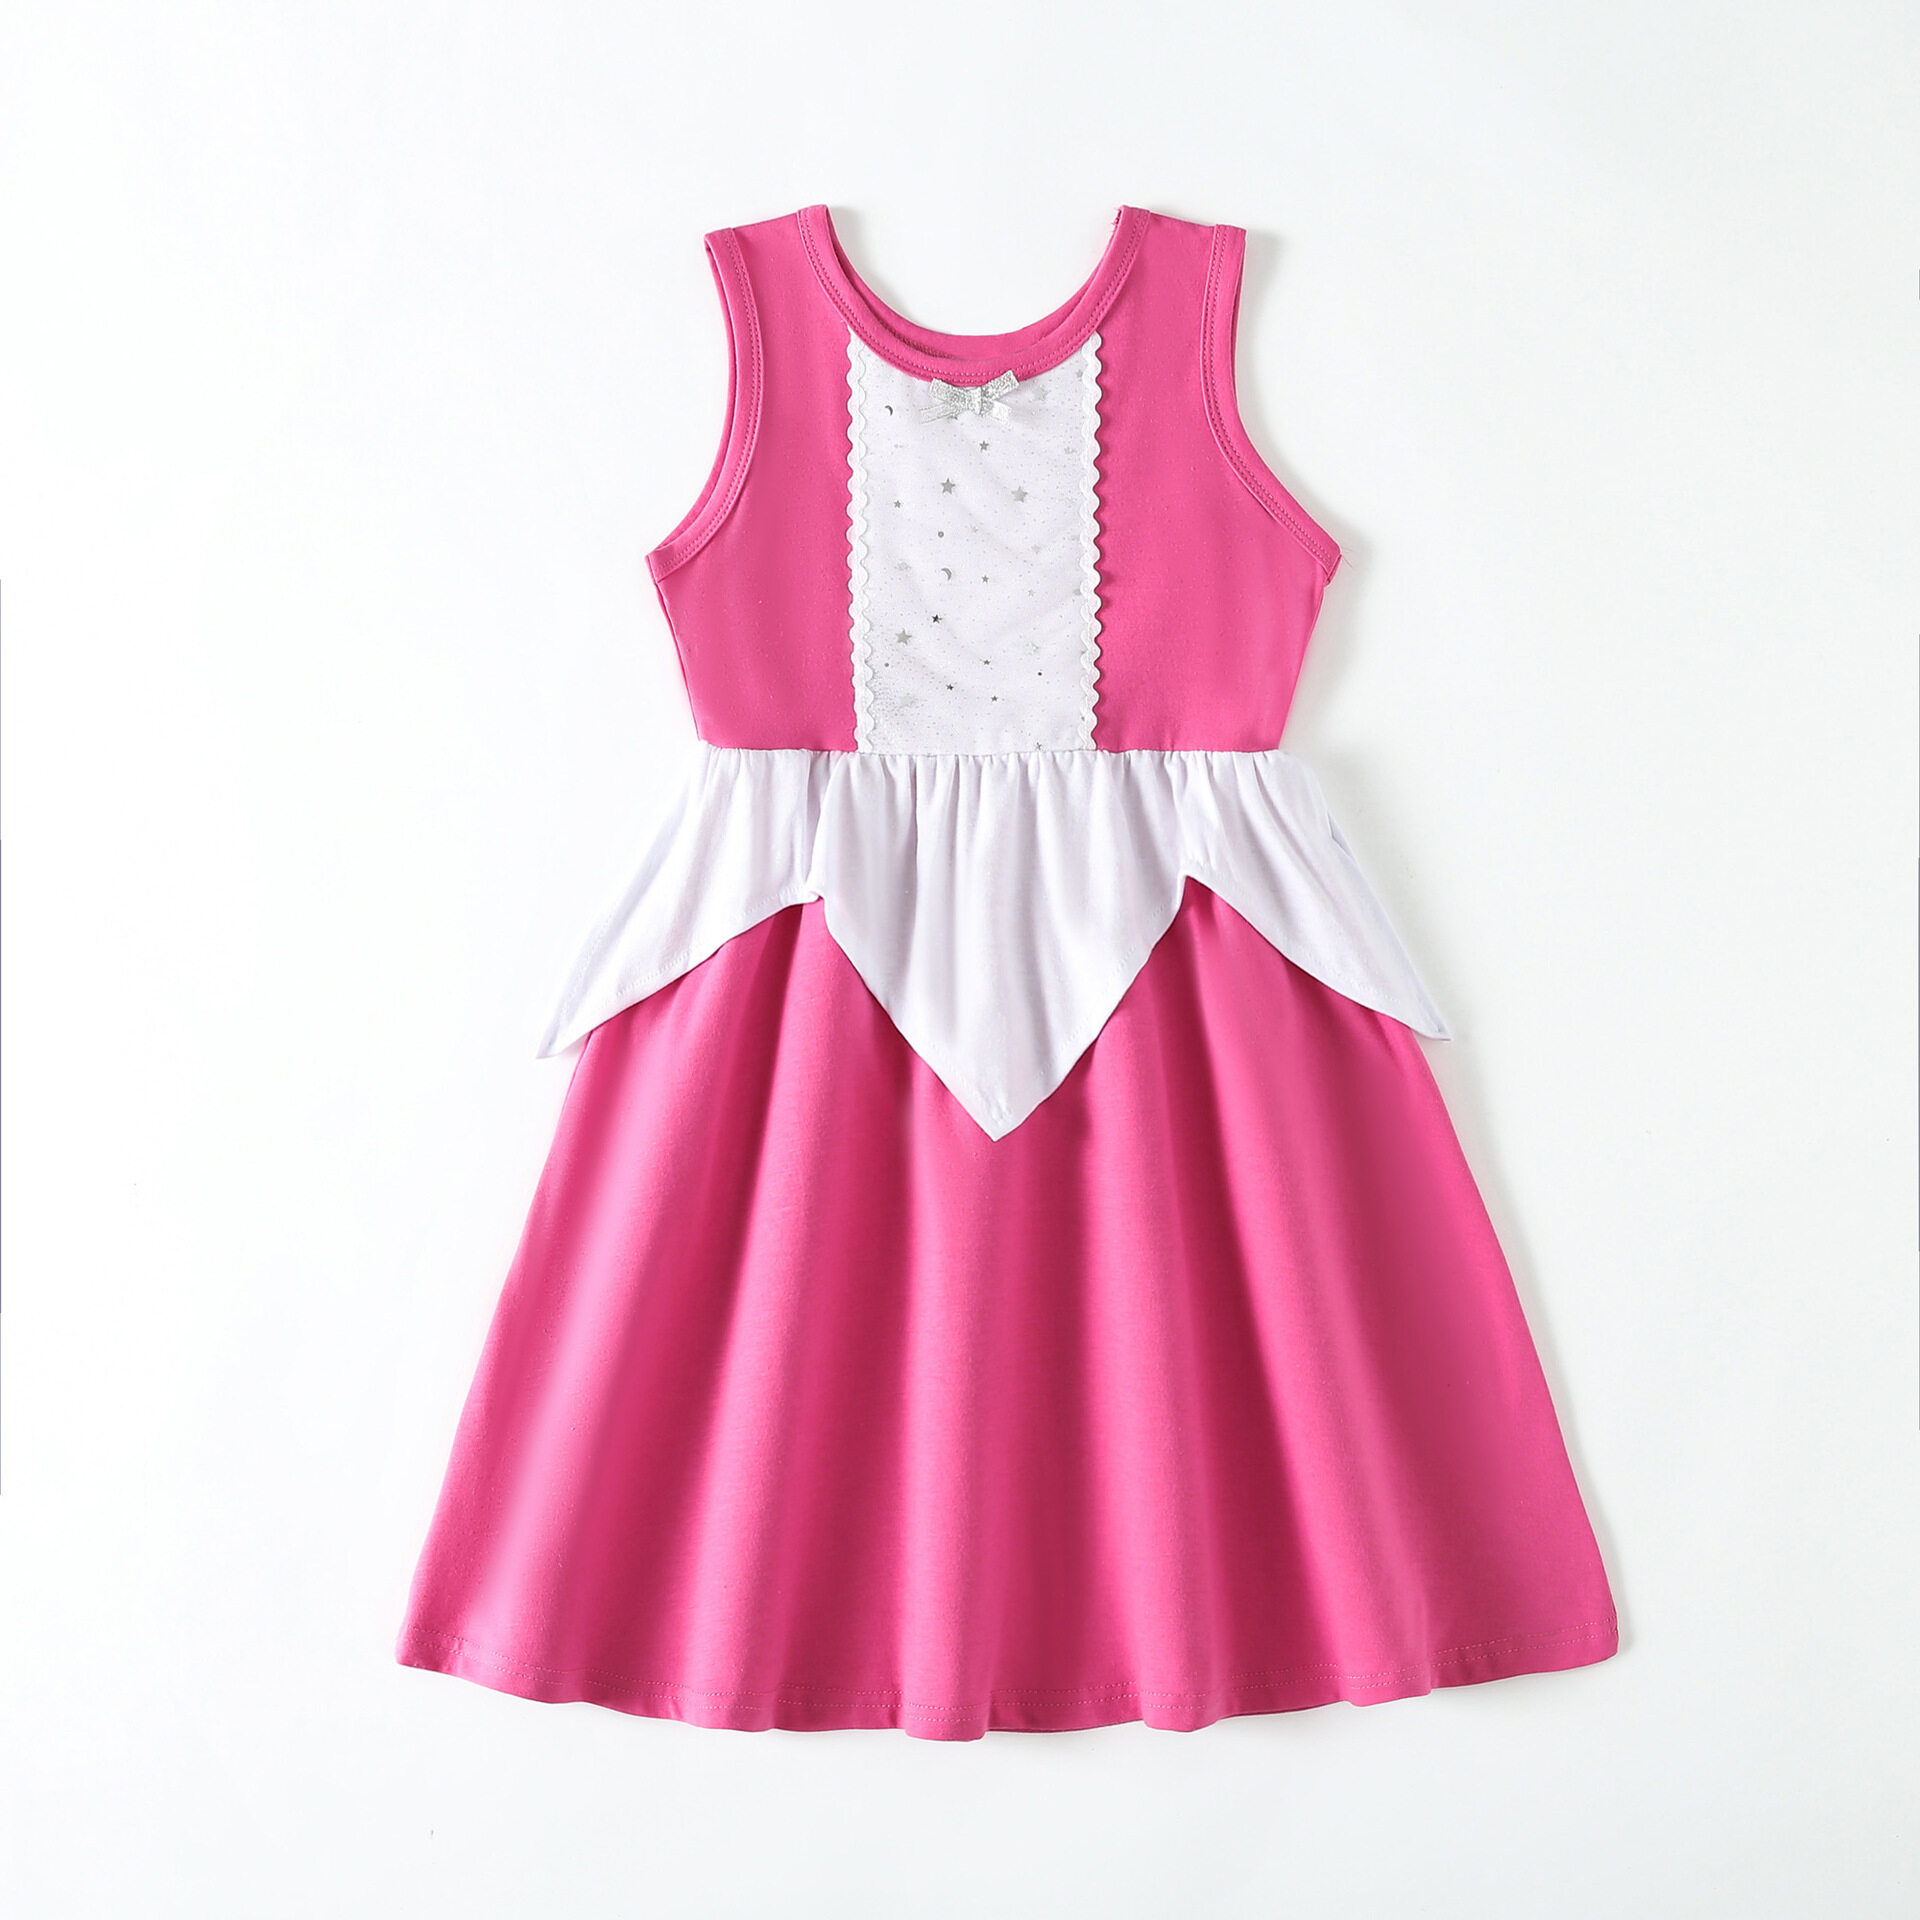 Cotton Baby Girl Clothes Summer Little Princess Toddler Kids Party Tutu Dresses - image 1 of 2